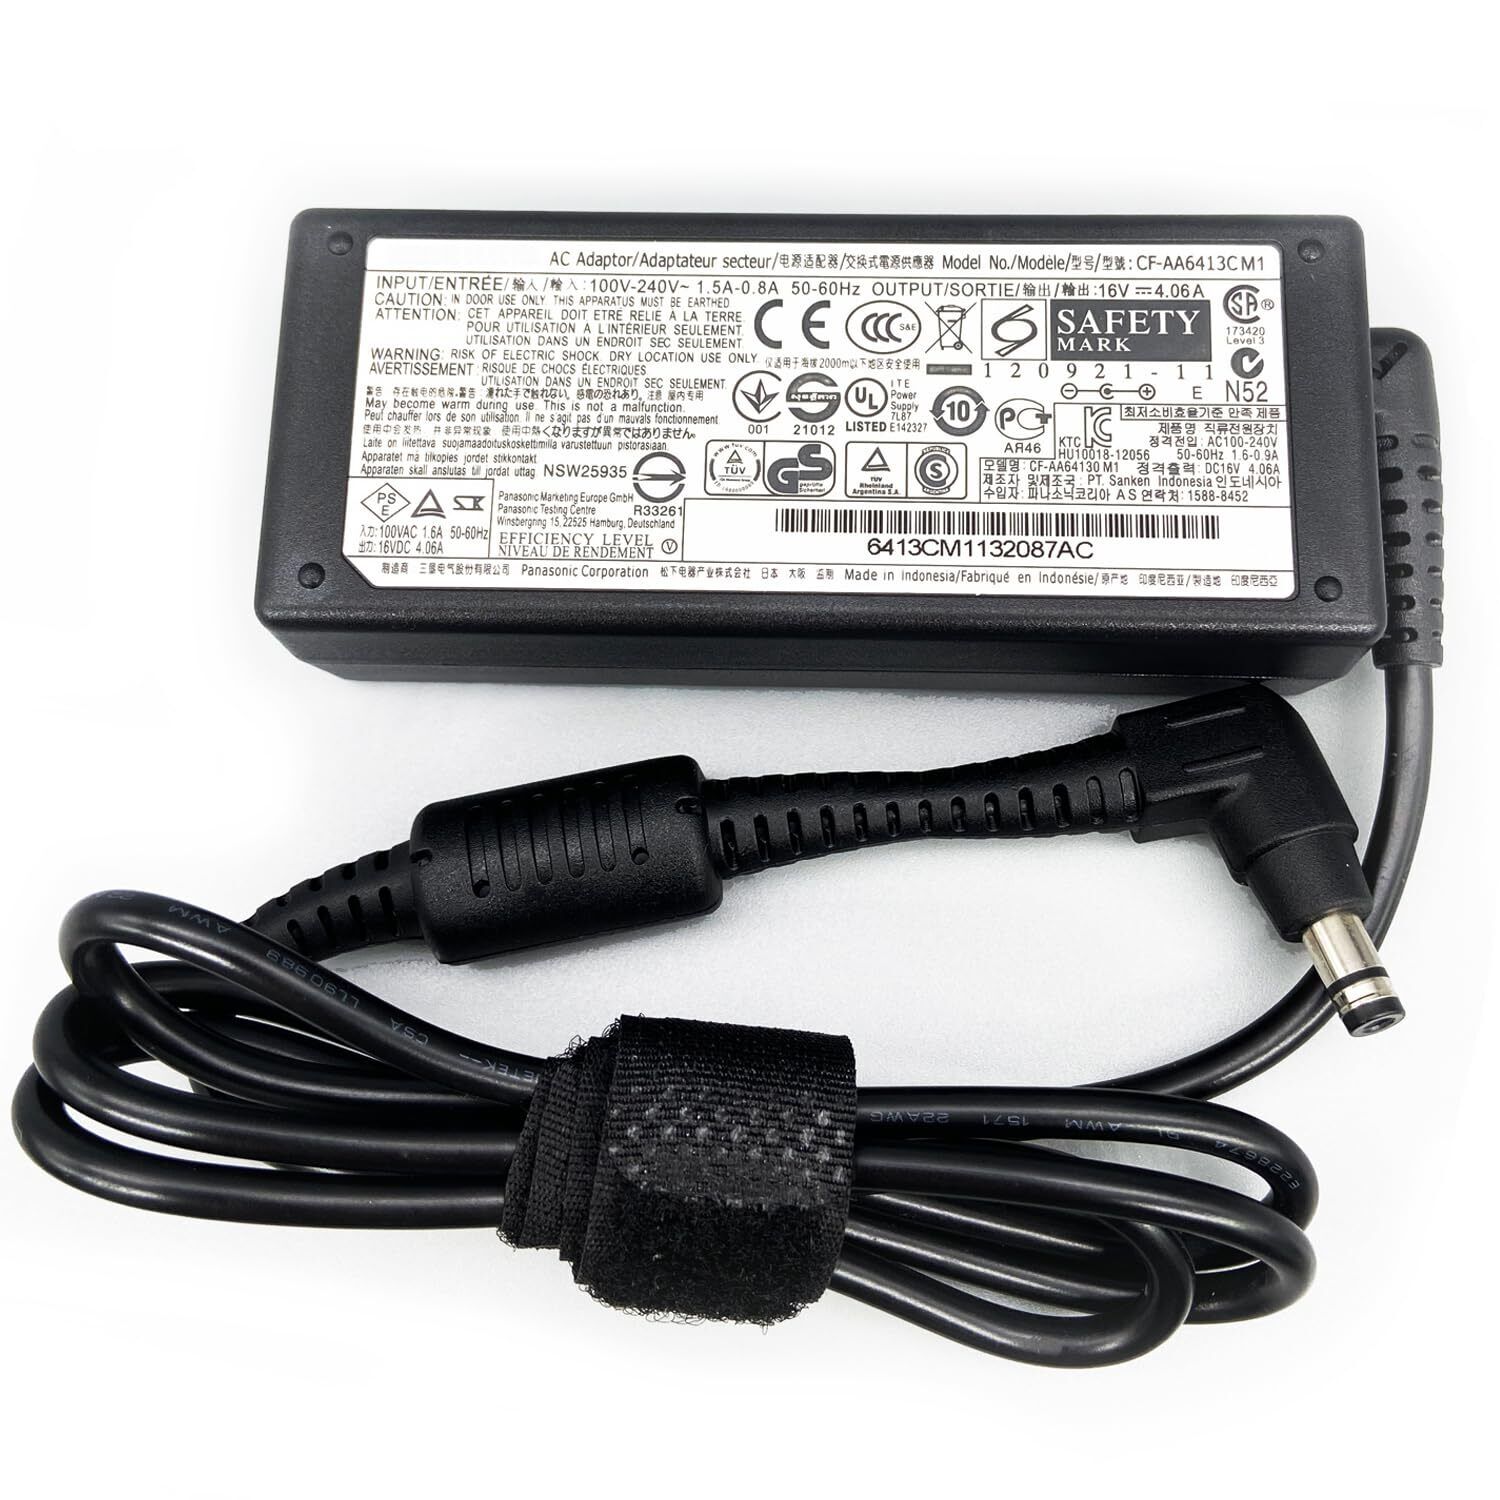 New Compatible with Panasonic 16V 4.06A CF-AA6413C M3 AC Adapter with Power C...